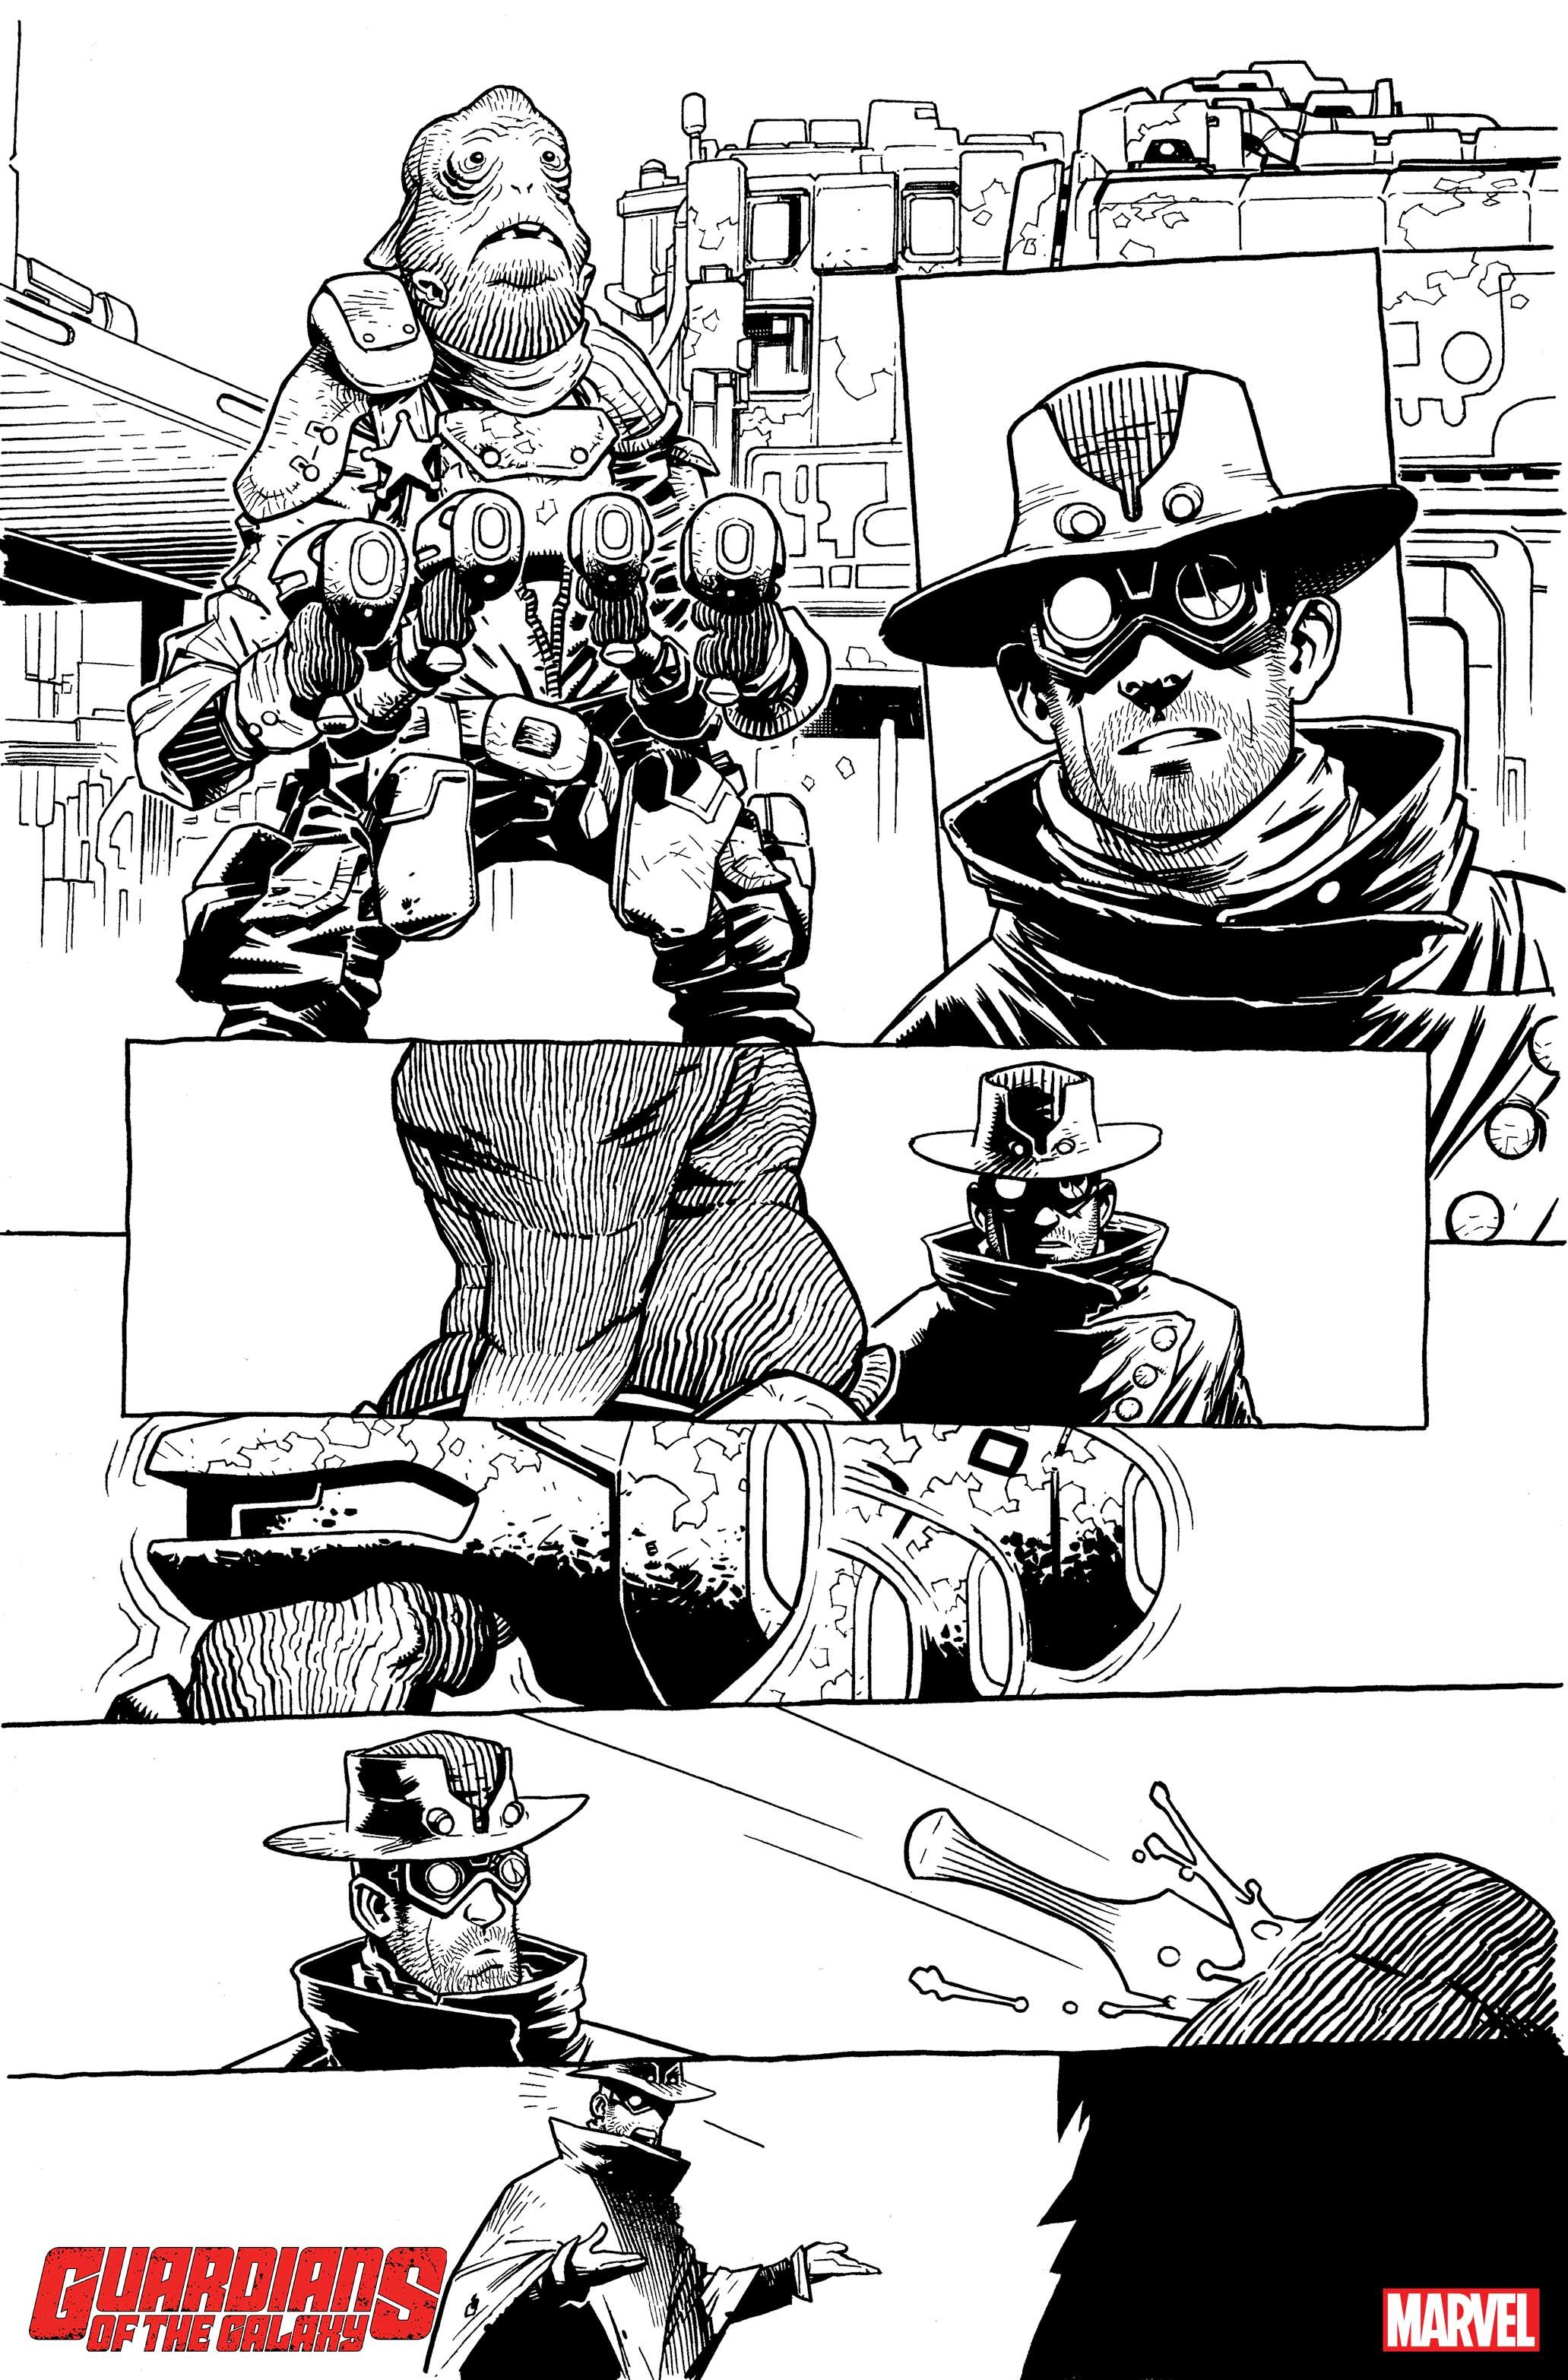 Guardians of the Galaxy Issue 1 Page 3